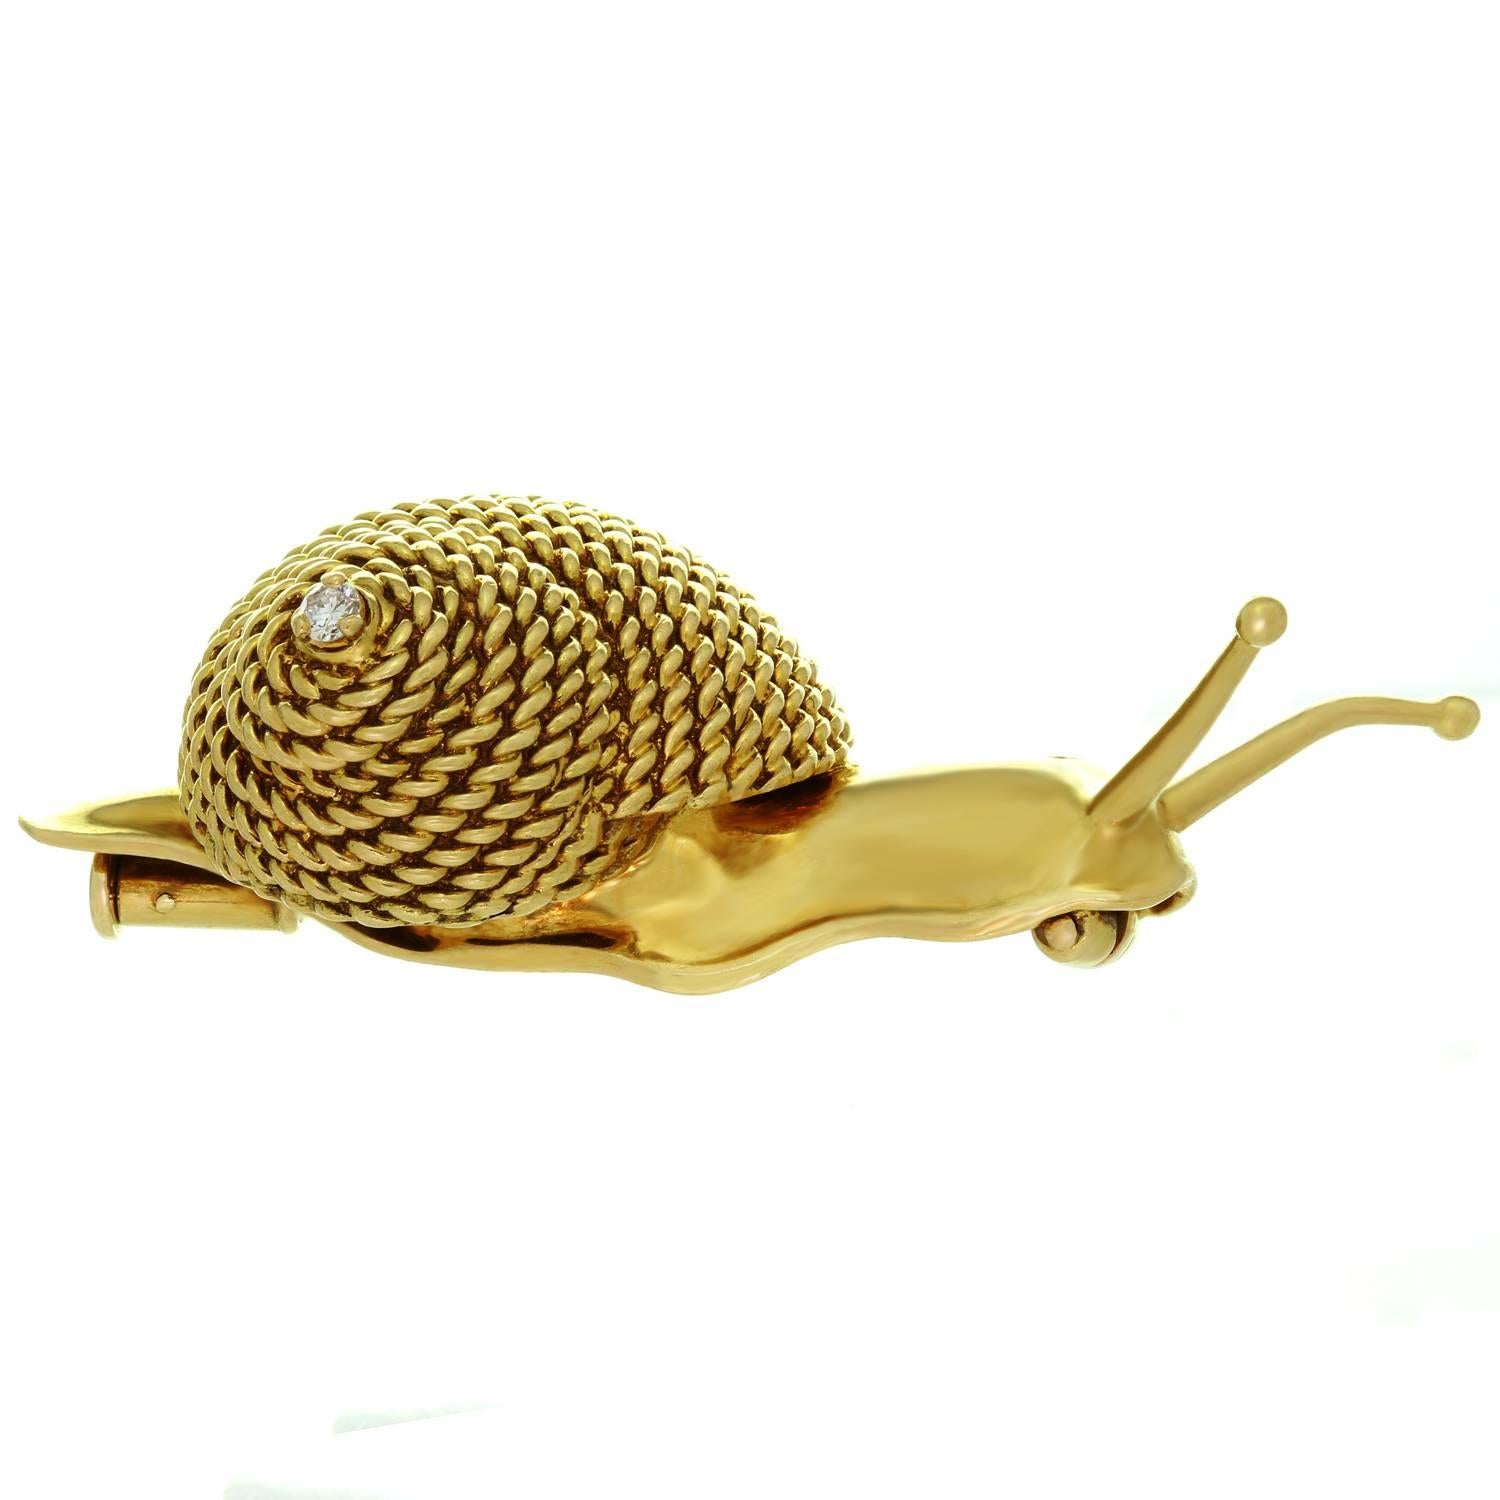 Hermes Solitaire Diamond Yellow Gold Snail Brooch